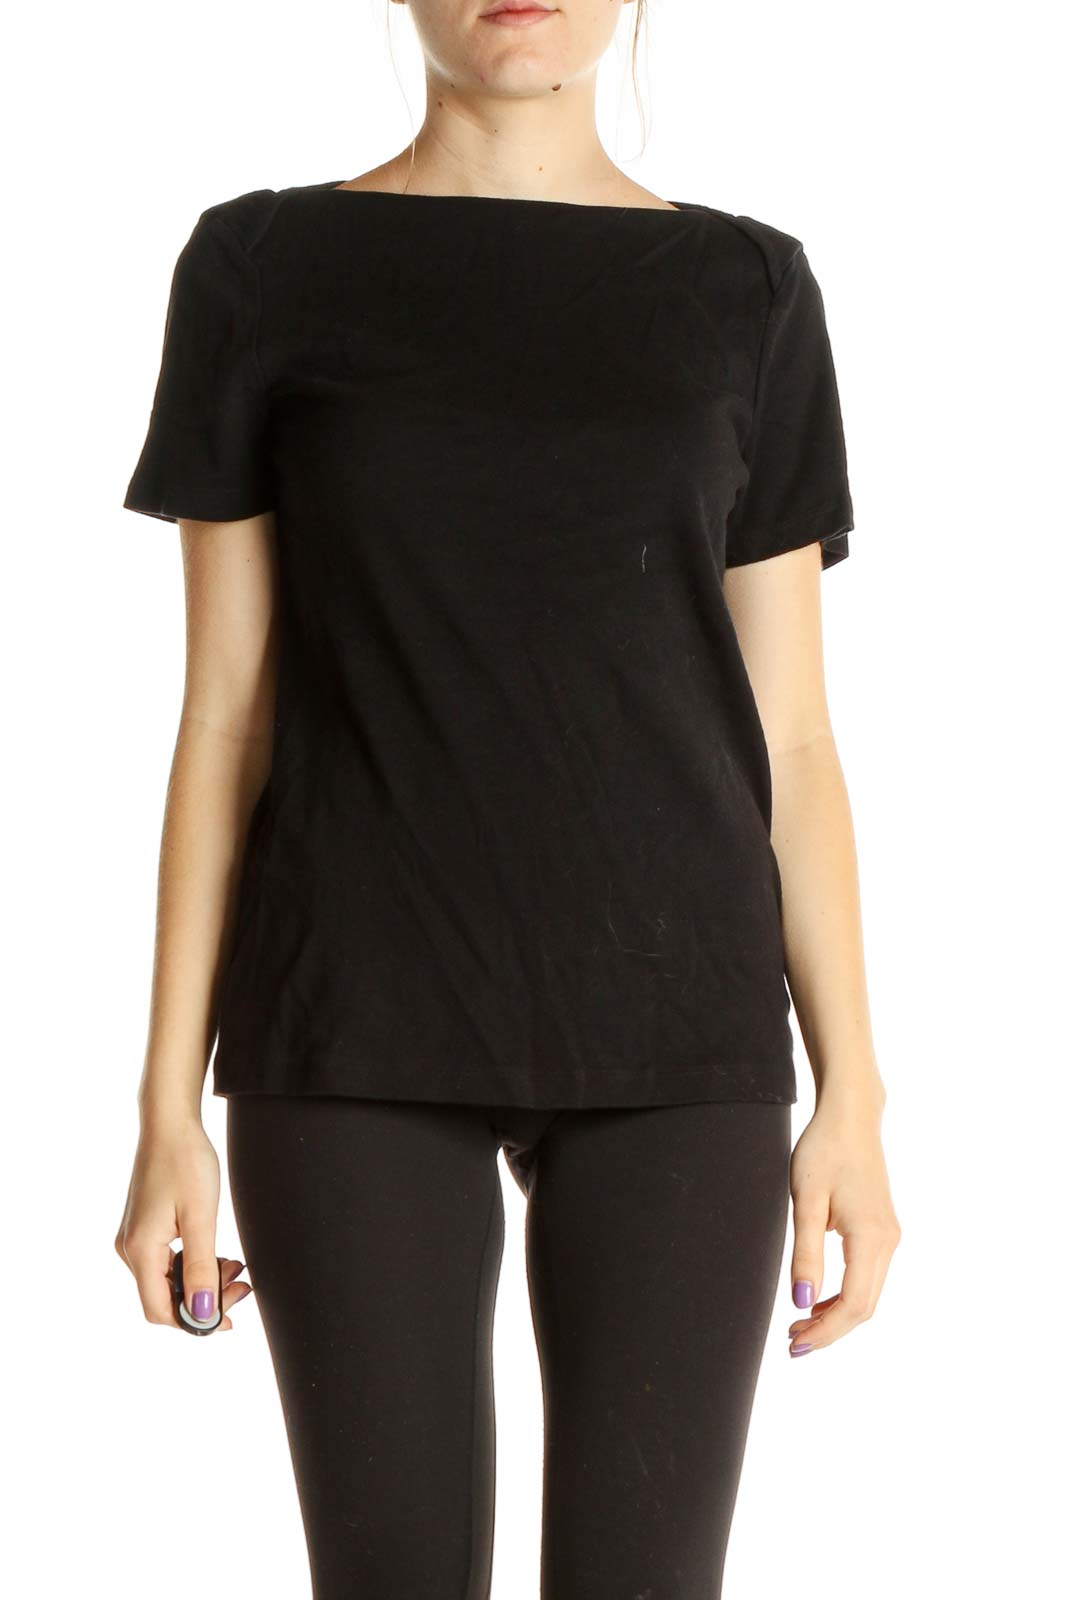 Black Solid All Day Wear T-Shirt Front